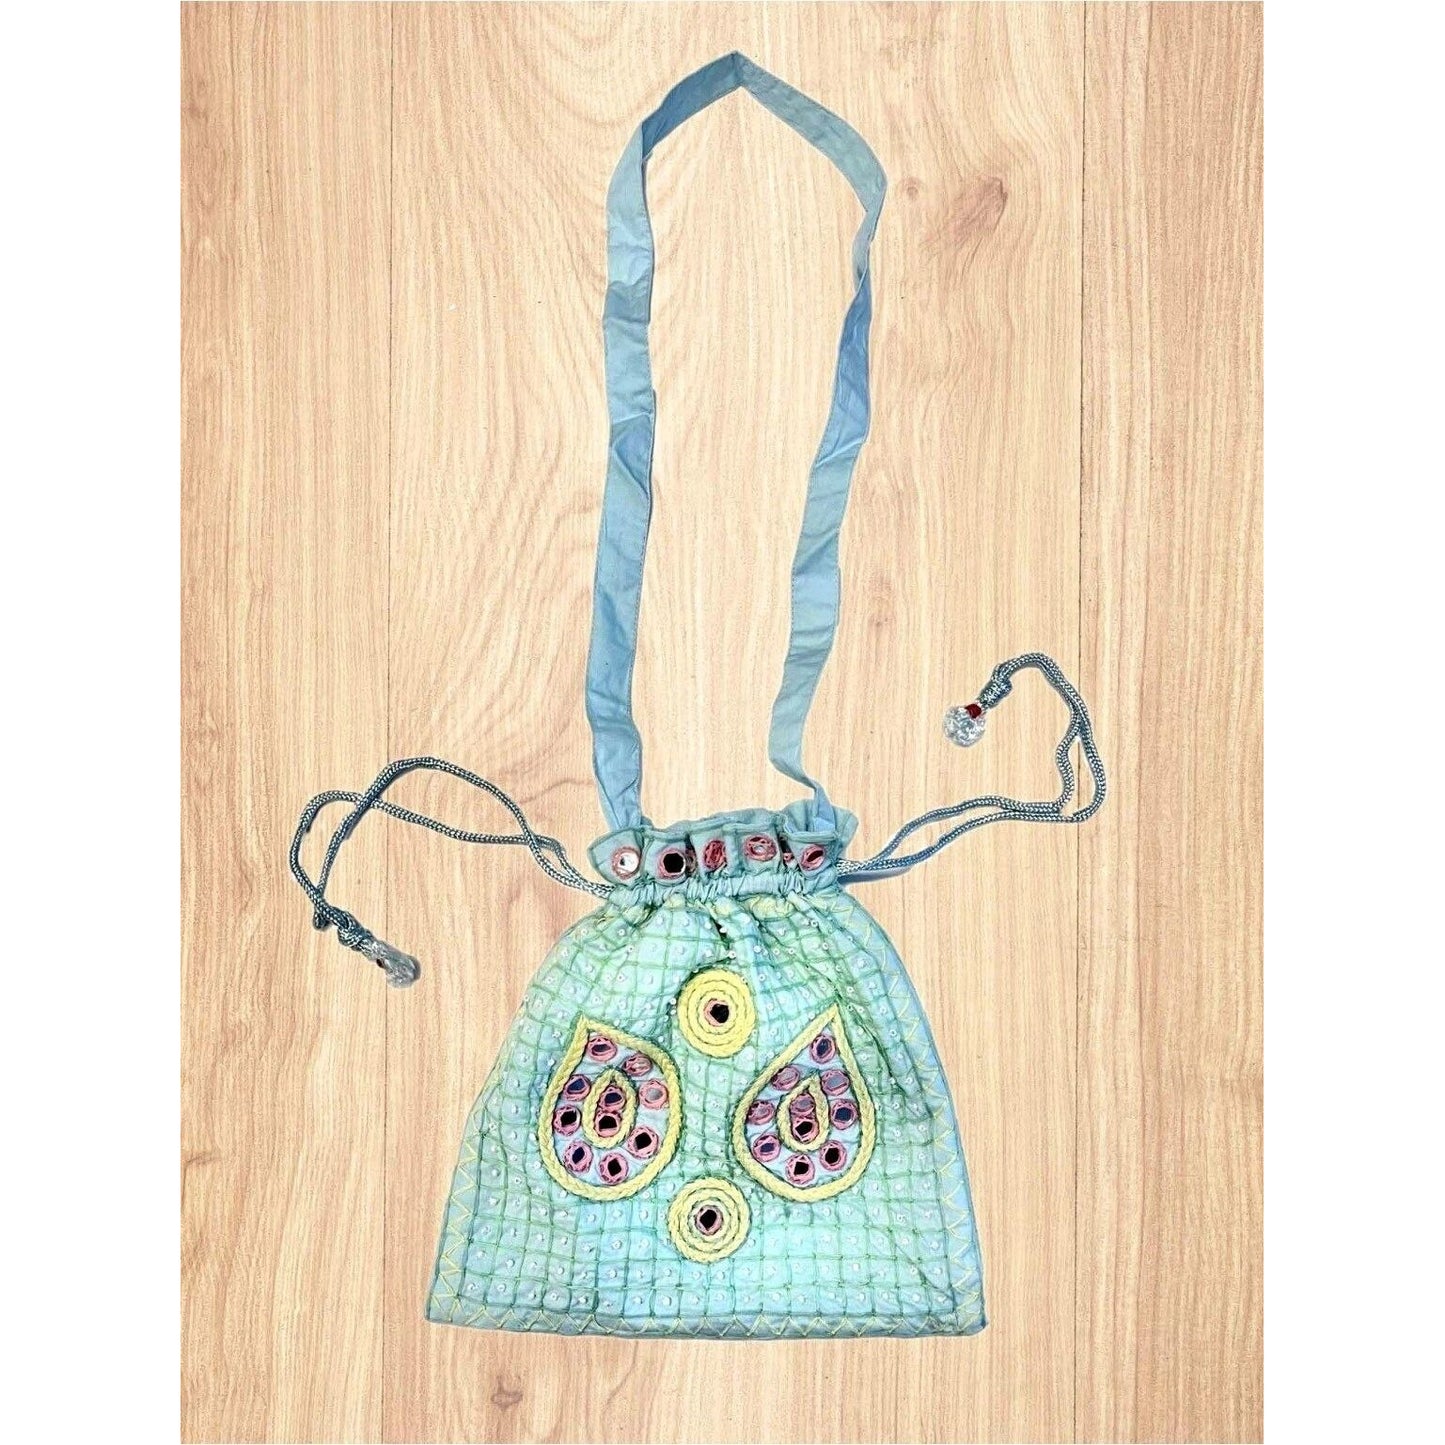 Embroidered Mirror Bag with Circles - Hand Made